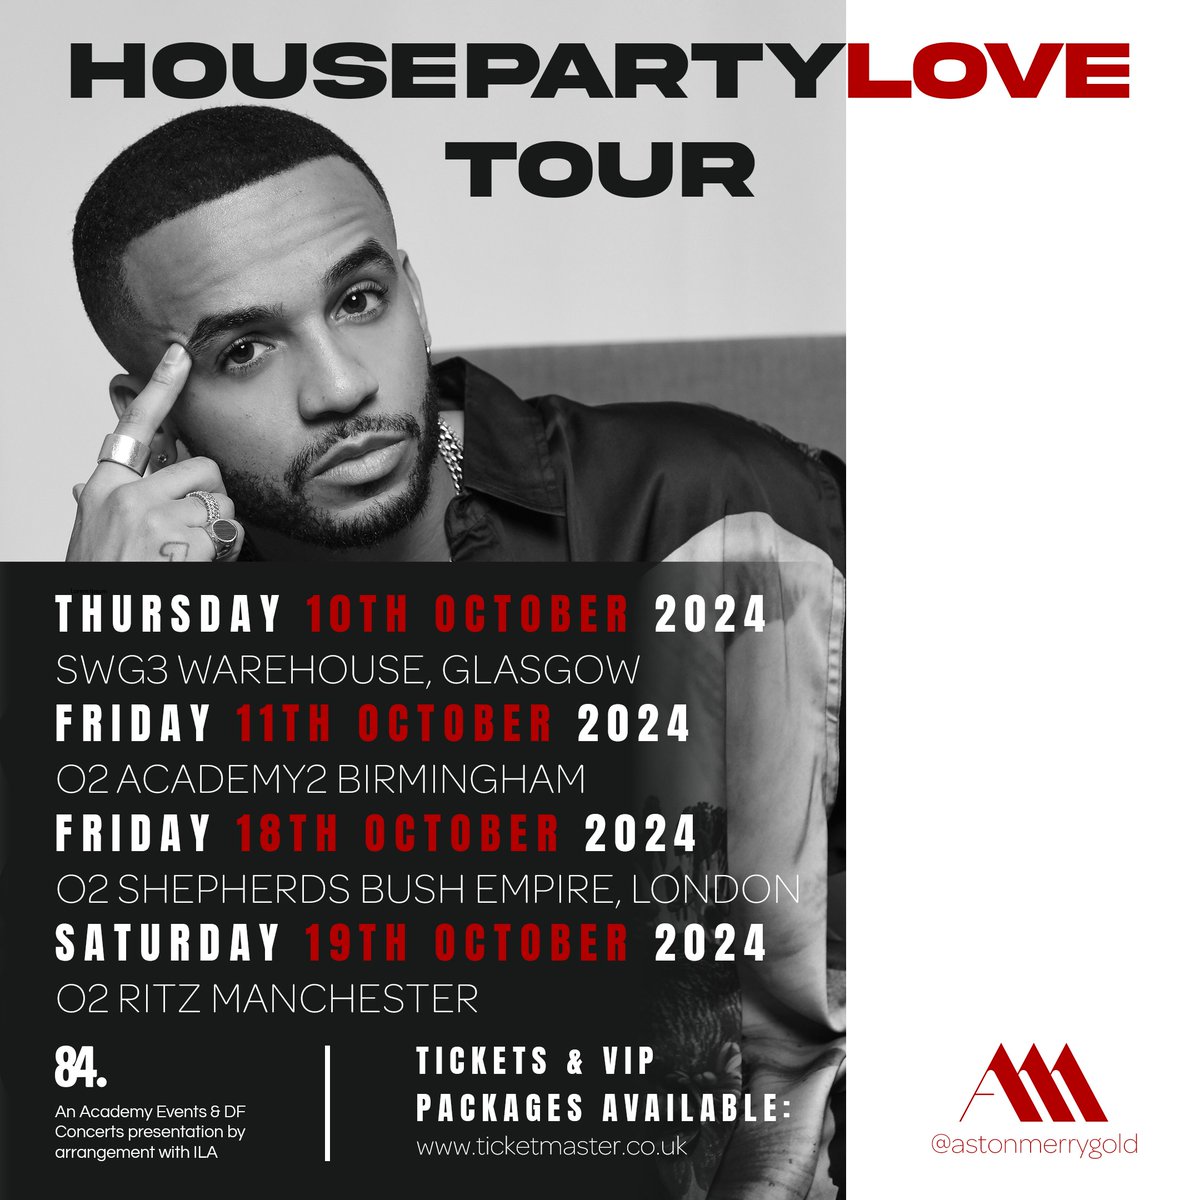 Known for his incredible stage presence during his time with band #JLS, who had five Number 1 hits, @AstonMerrygold is heading on a solo tour! 📅 Fri 11 Oct @O2AcademyBham 📅 Fri 18 Oct @O2SBE 📅 Sat 19 Oct @O2RitzManc 🎟️ Tickets available 👉 amg-venues.com/ot6h50Q38bh